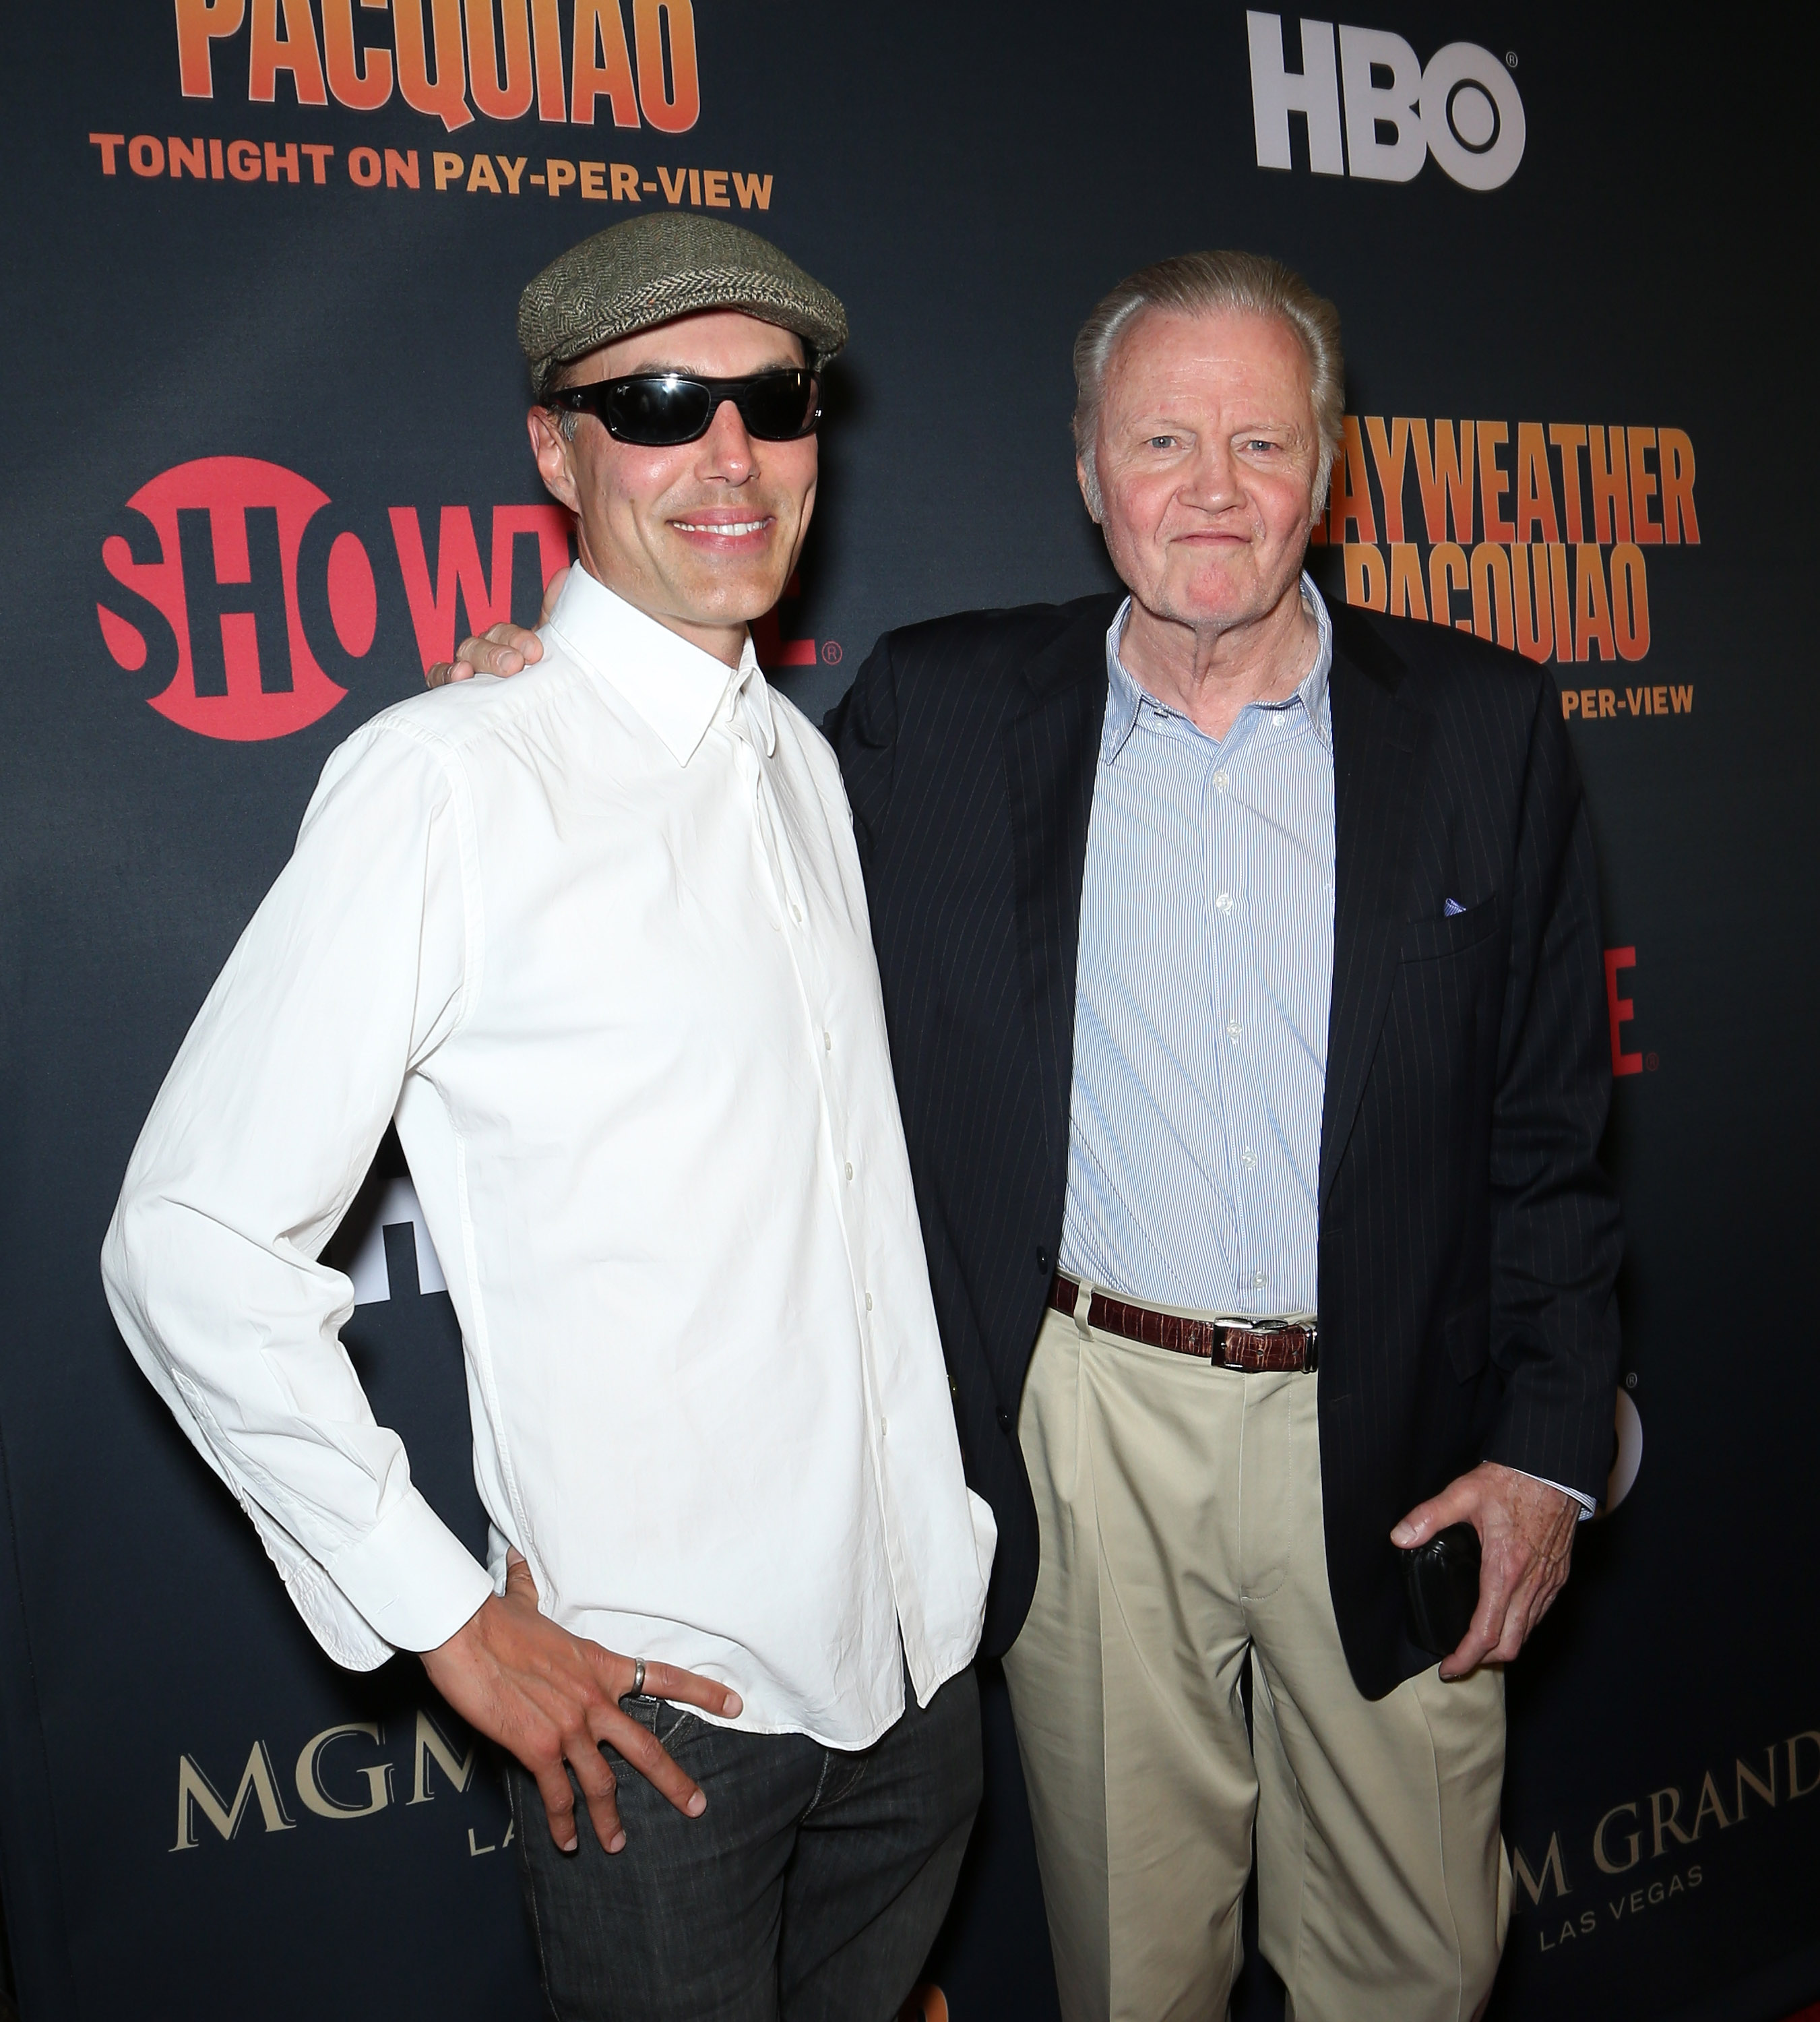 James Haven and Jon Voight on May 2, 2015 in Las Vegas, Nevada. | Source: Getty Images